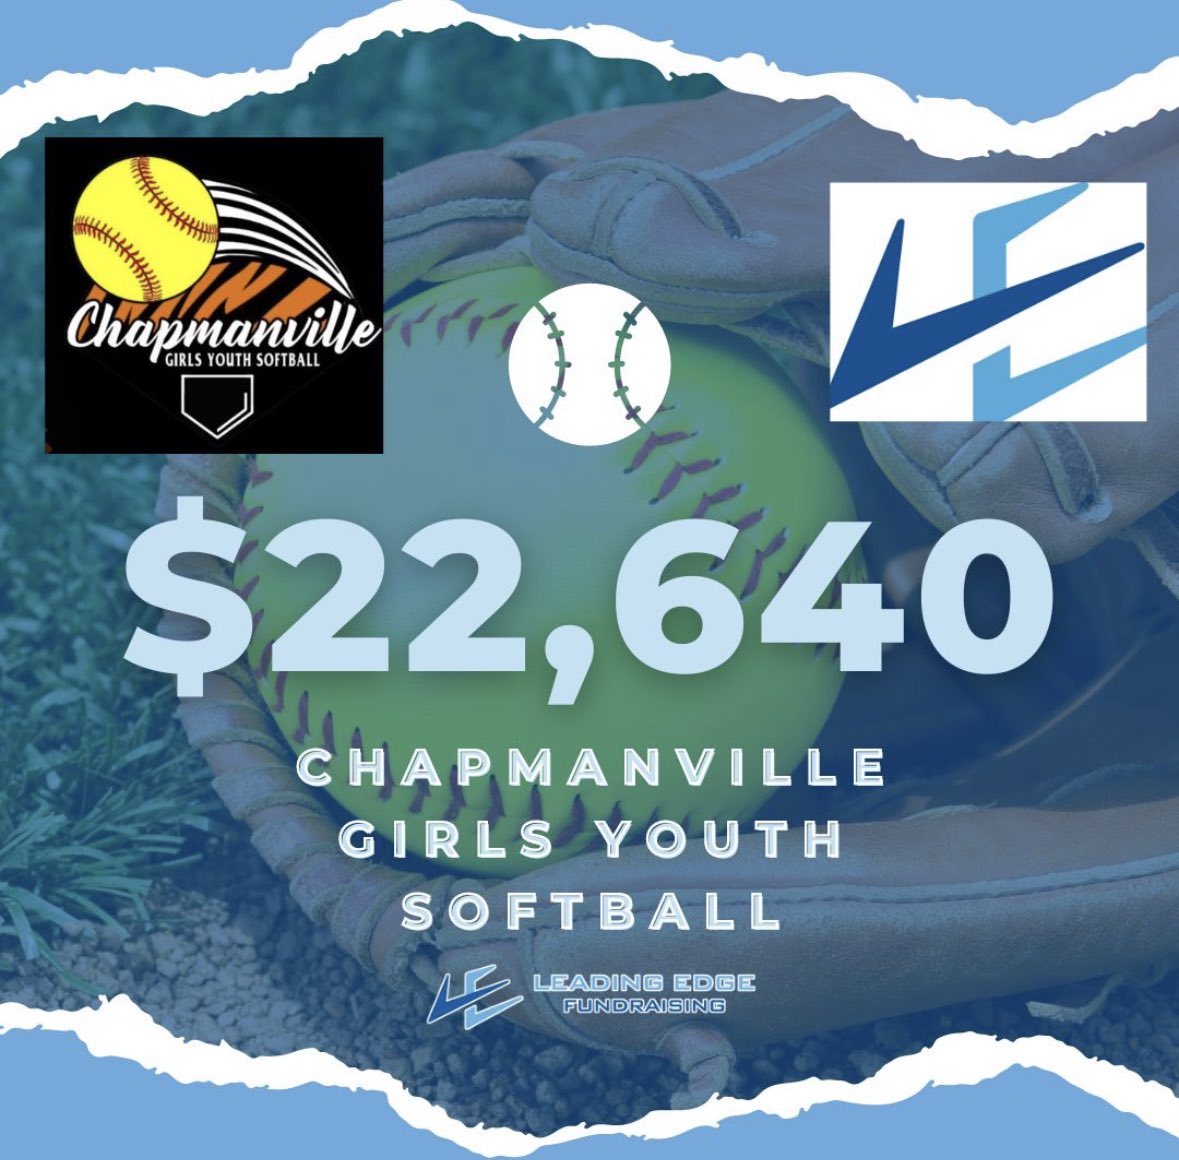 Yes, you read that right! Chapmanville Girls Youth Softball crushed it! Such a deserving group with hard working President and Board. I’m blessed to have helped them get one step closer for their own indoor practice space! Who can I help next?